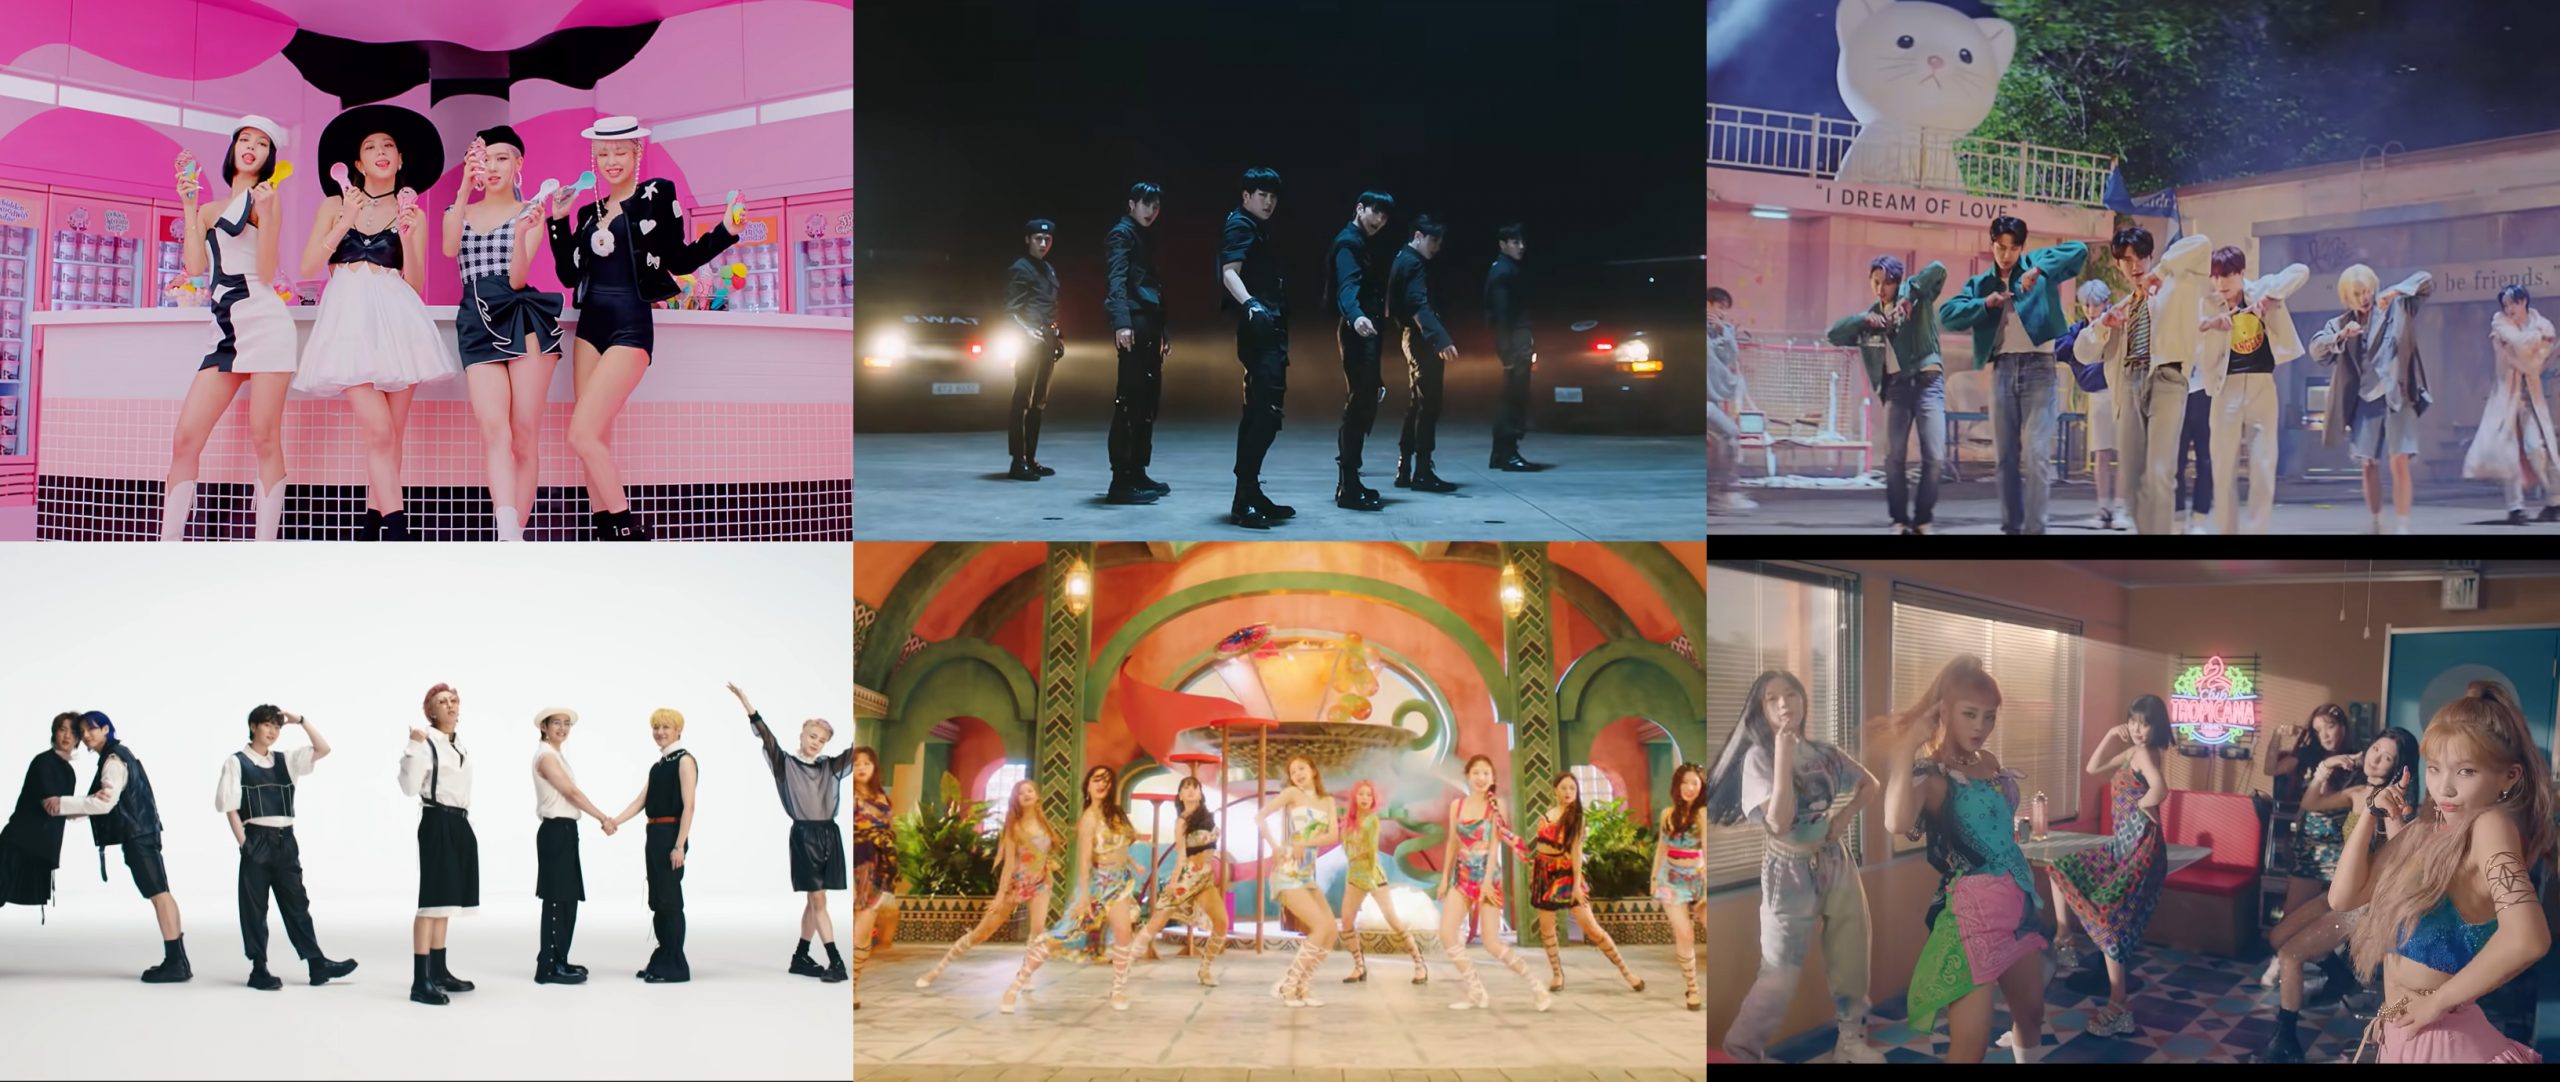 The six nominees for Best K-Pop at the 2021 VMAs